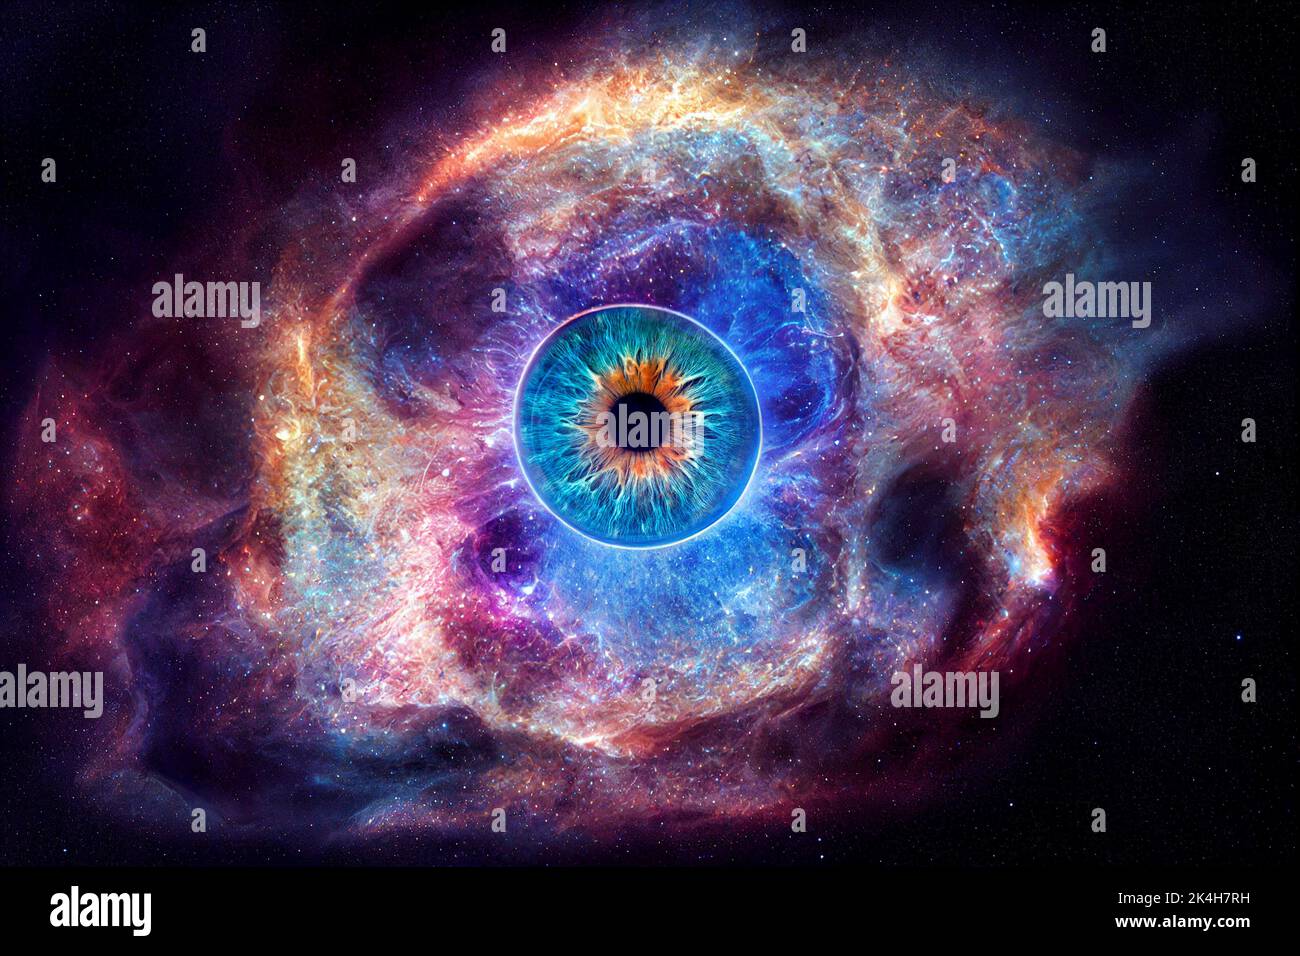 Outer space nebula abstract effect. Iris, eye of the universe. abstract circle explosion of hot orange and electric blue gases. Stock Photo